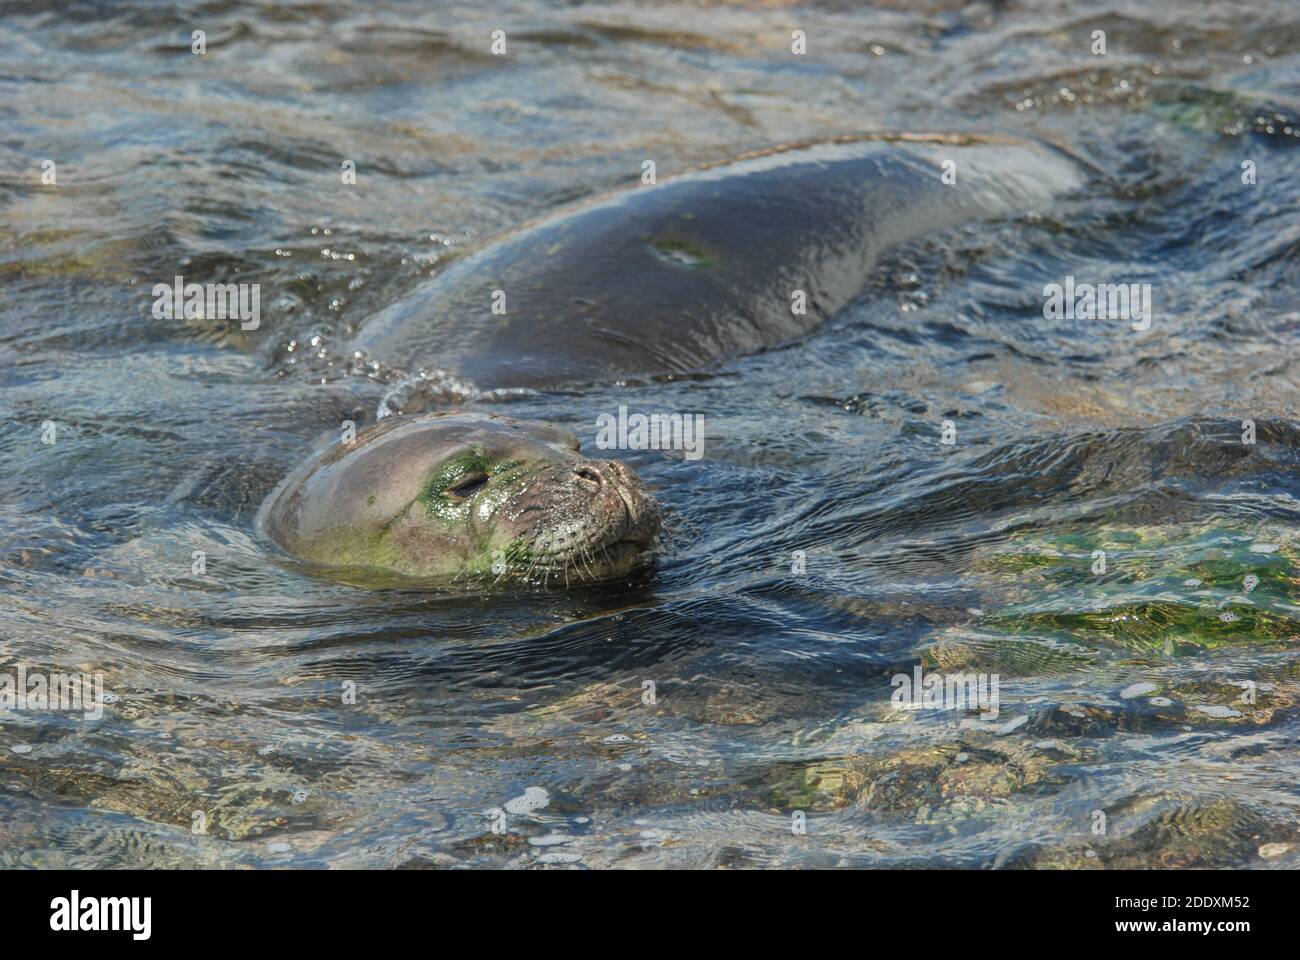 A Hawaiian monk seal (Neomonachus schauinslandi) from Kauai, these endangered seals are endemic to Hawaii and are threatened with extinction. Stock Photo